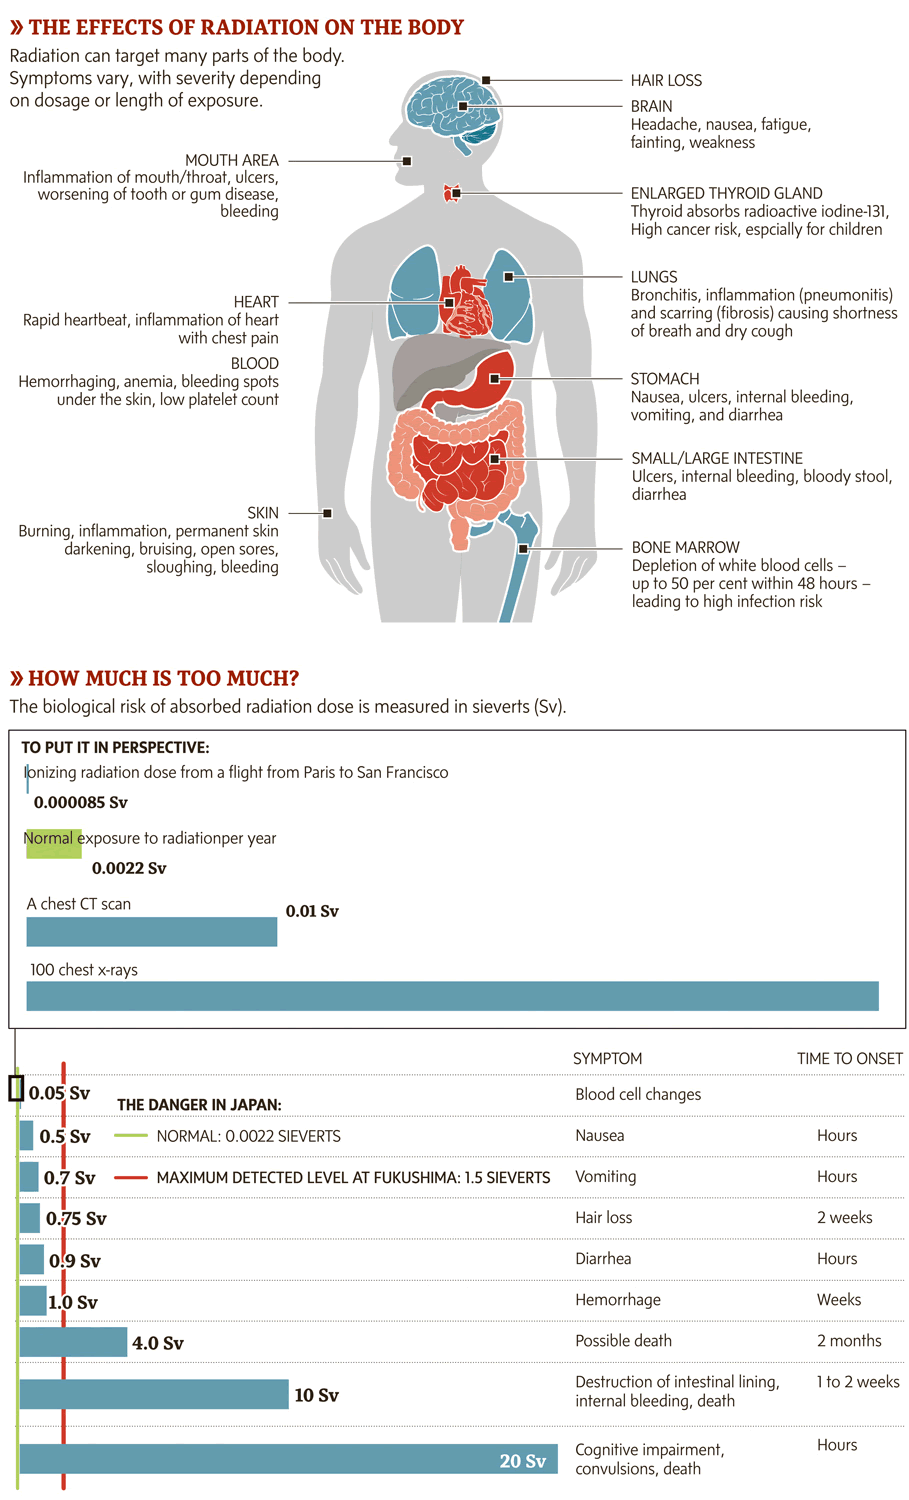 Image showing body parts effected by radiation and table showing health effects at increasing levels of radiation.